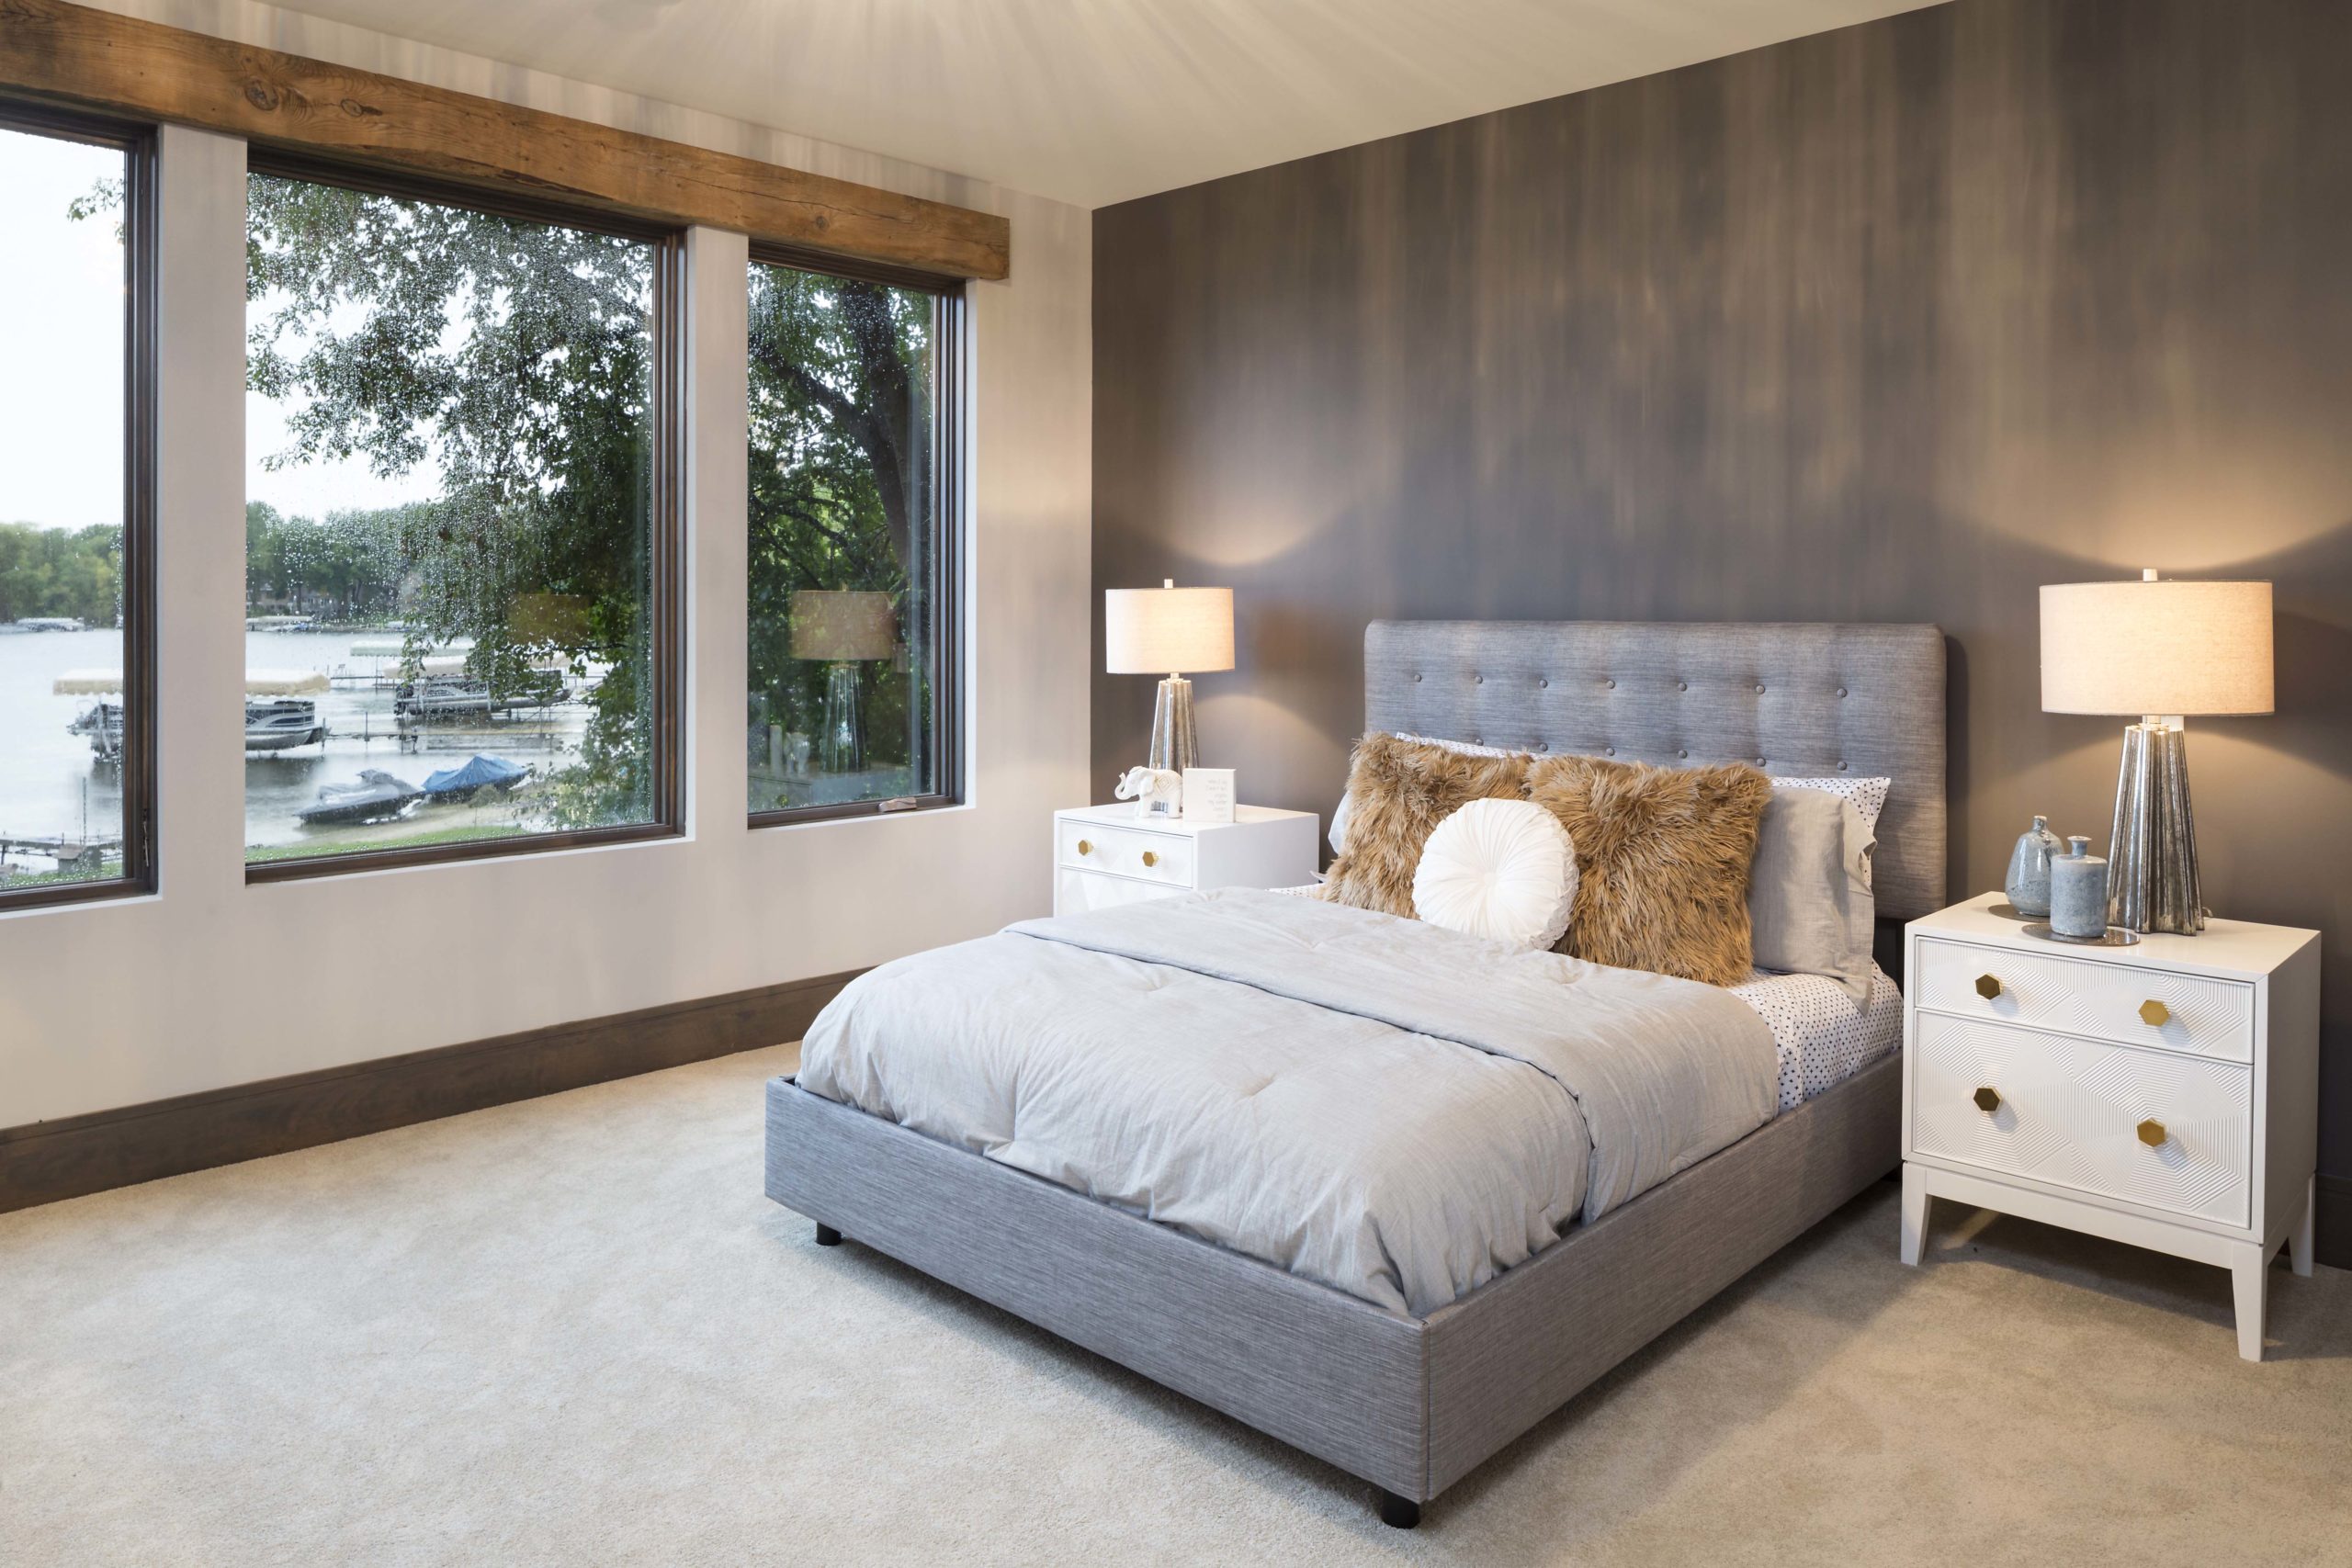 Large master suite with dark gray accent wall, light gray decorative bedding and cream night stands with lamps.